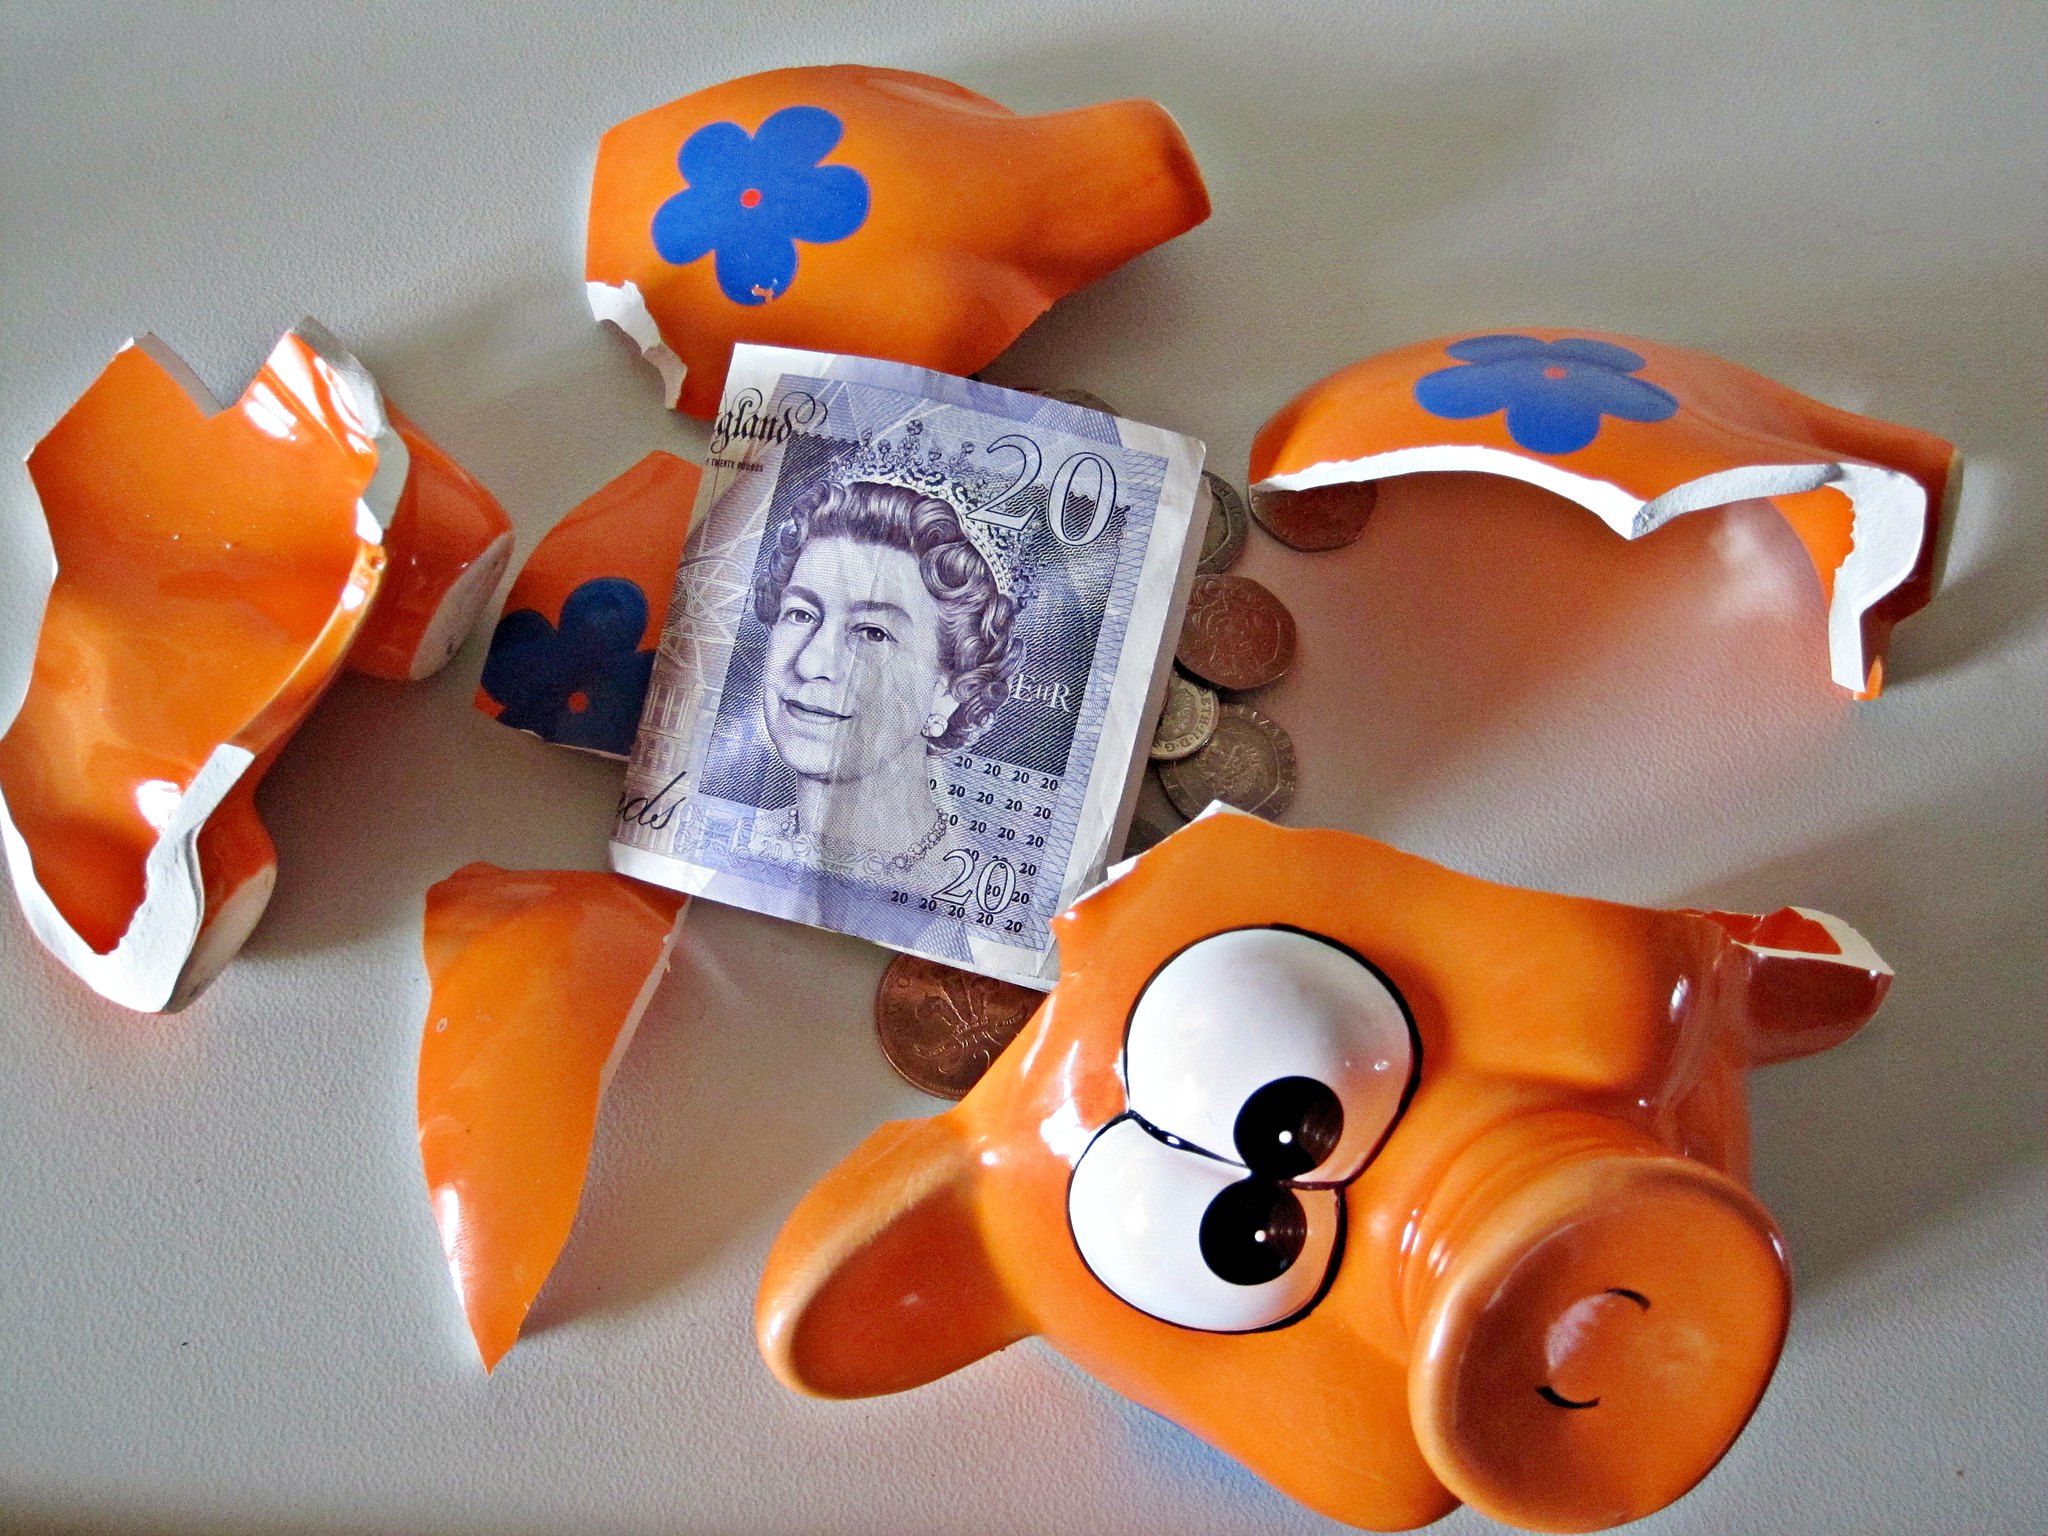 A smashed piggy bank with a UK £20 note and some coins inside